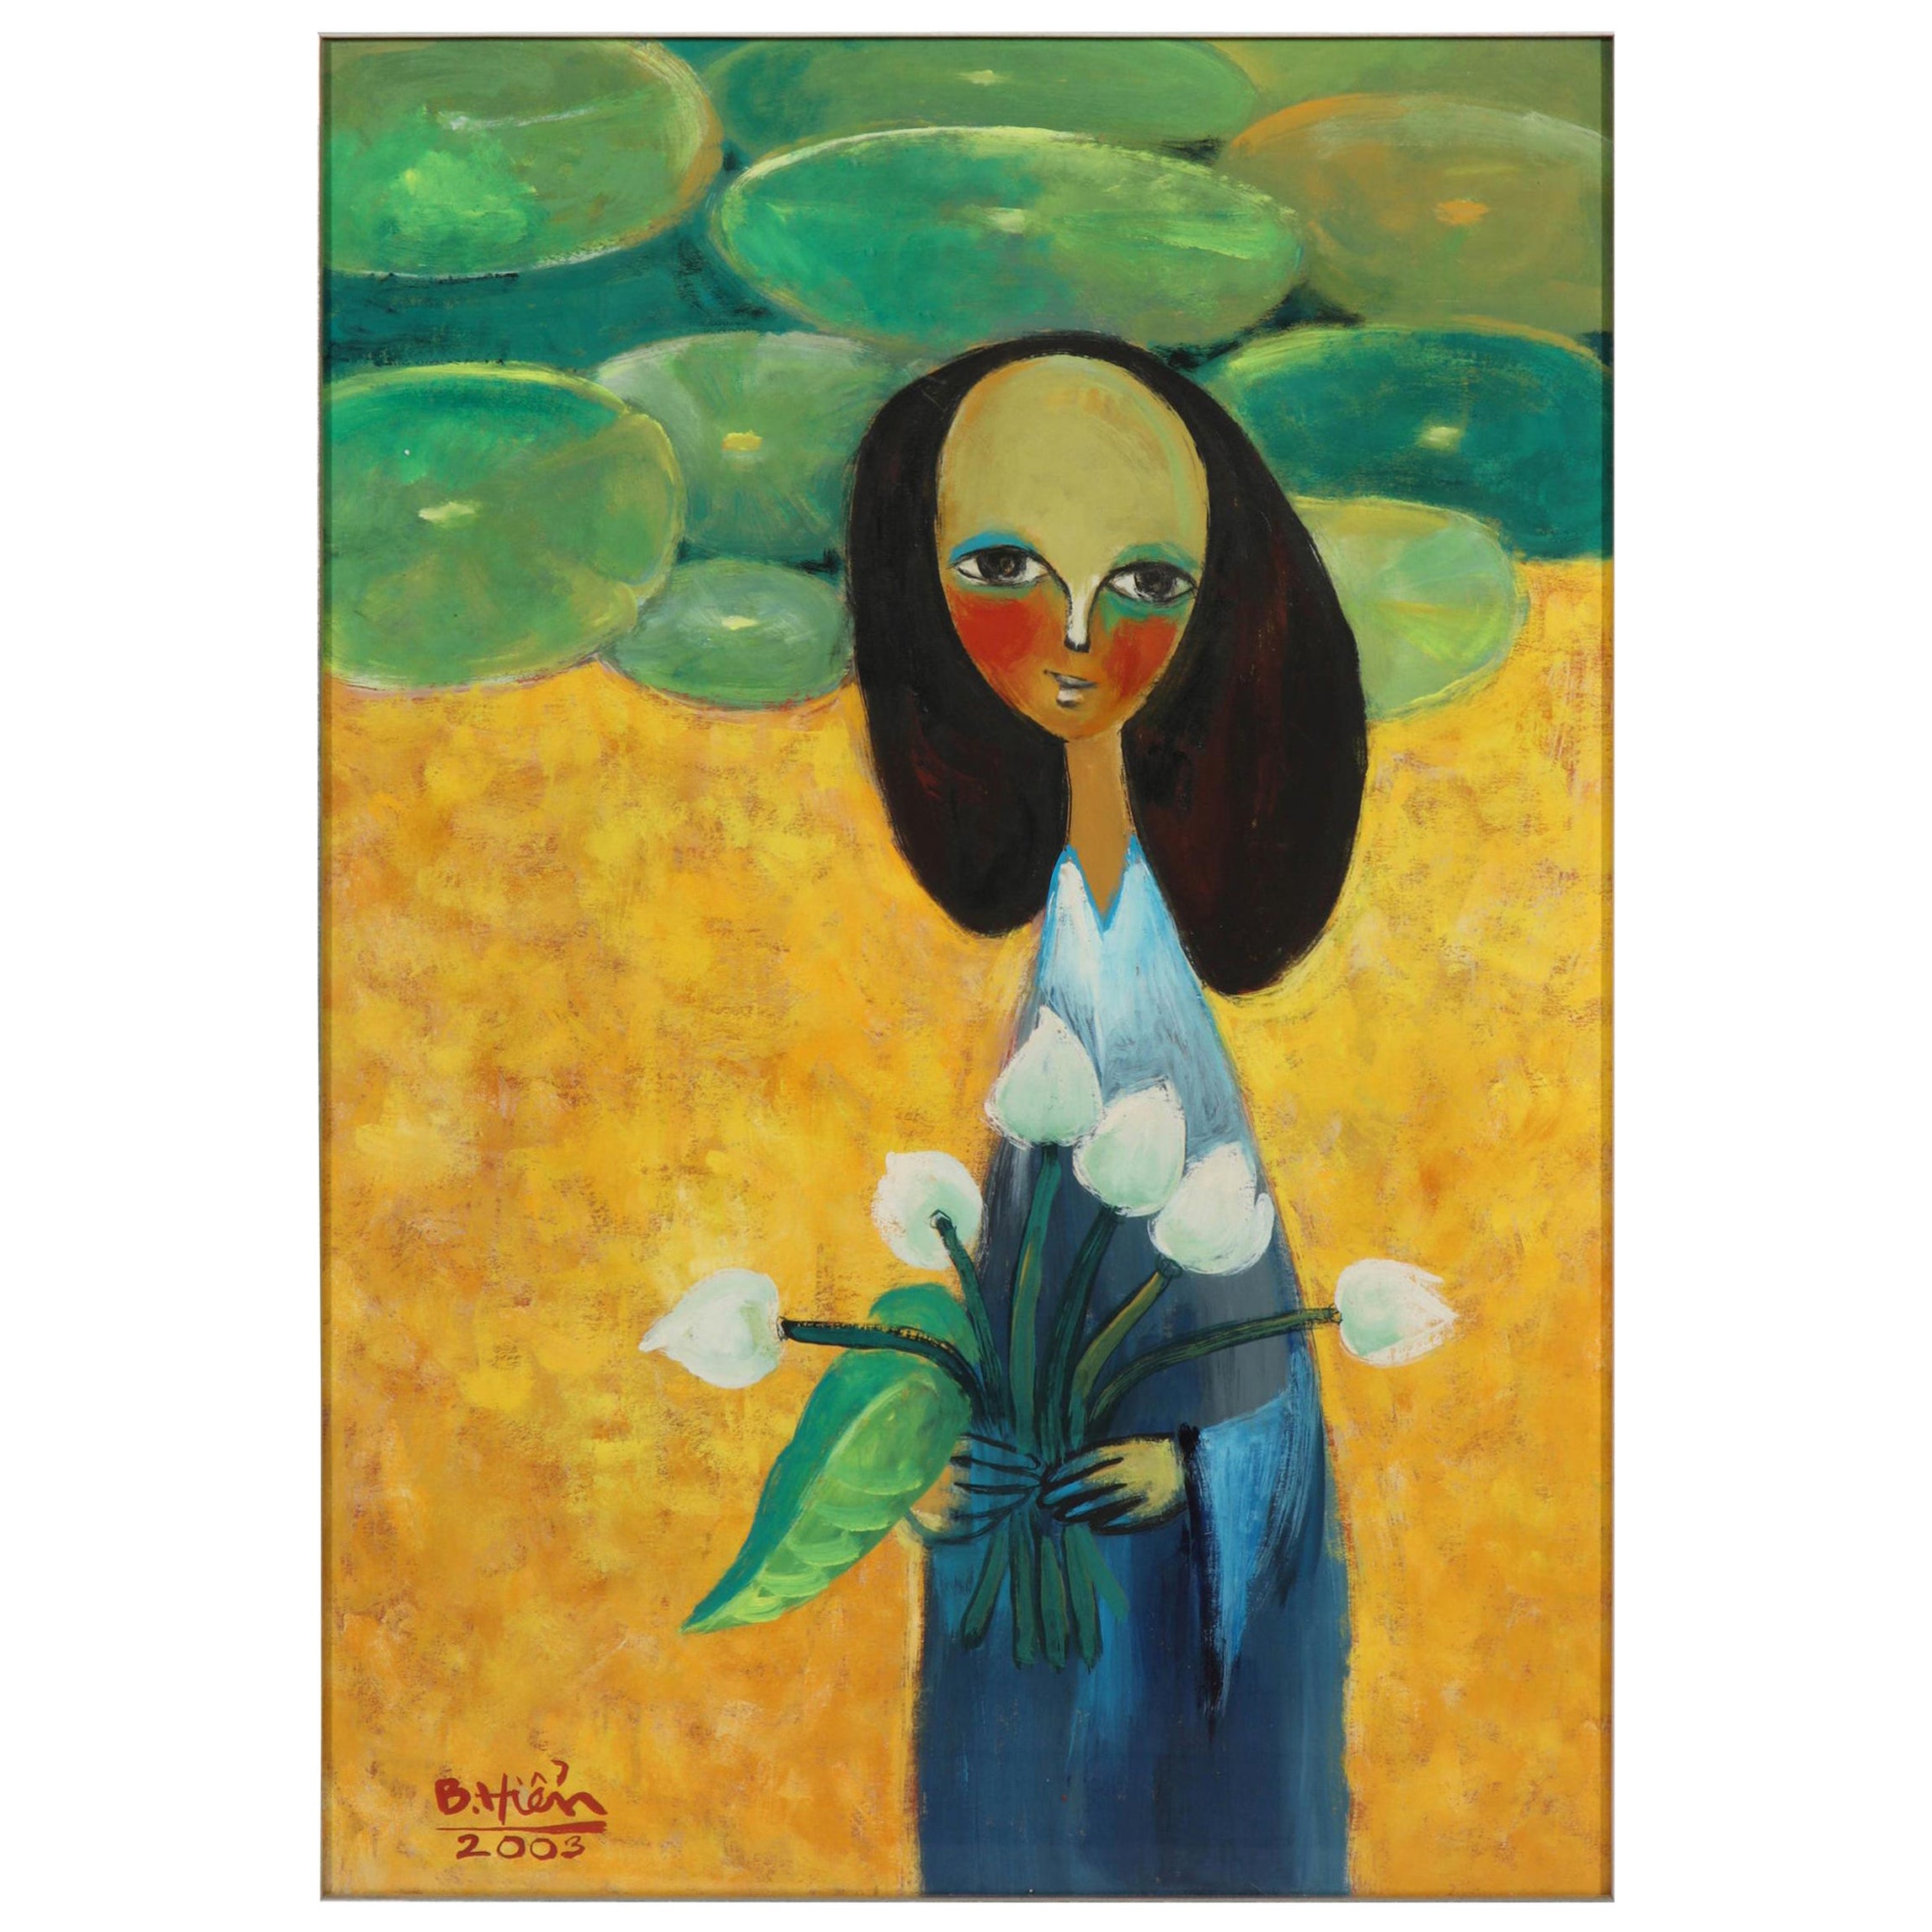 Painting of a Lady with Flowers, Green, Yellow and Blue, On Paper, Hanoi Artist For Sale